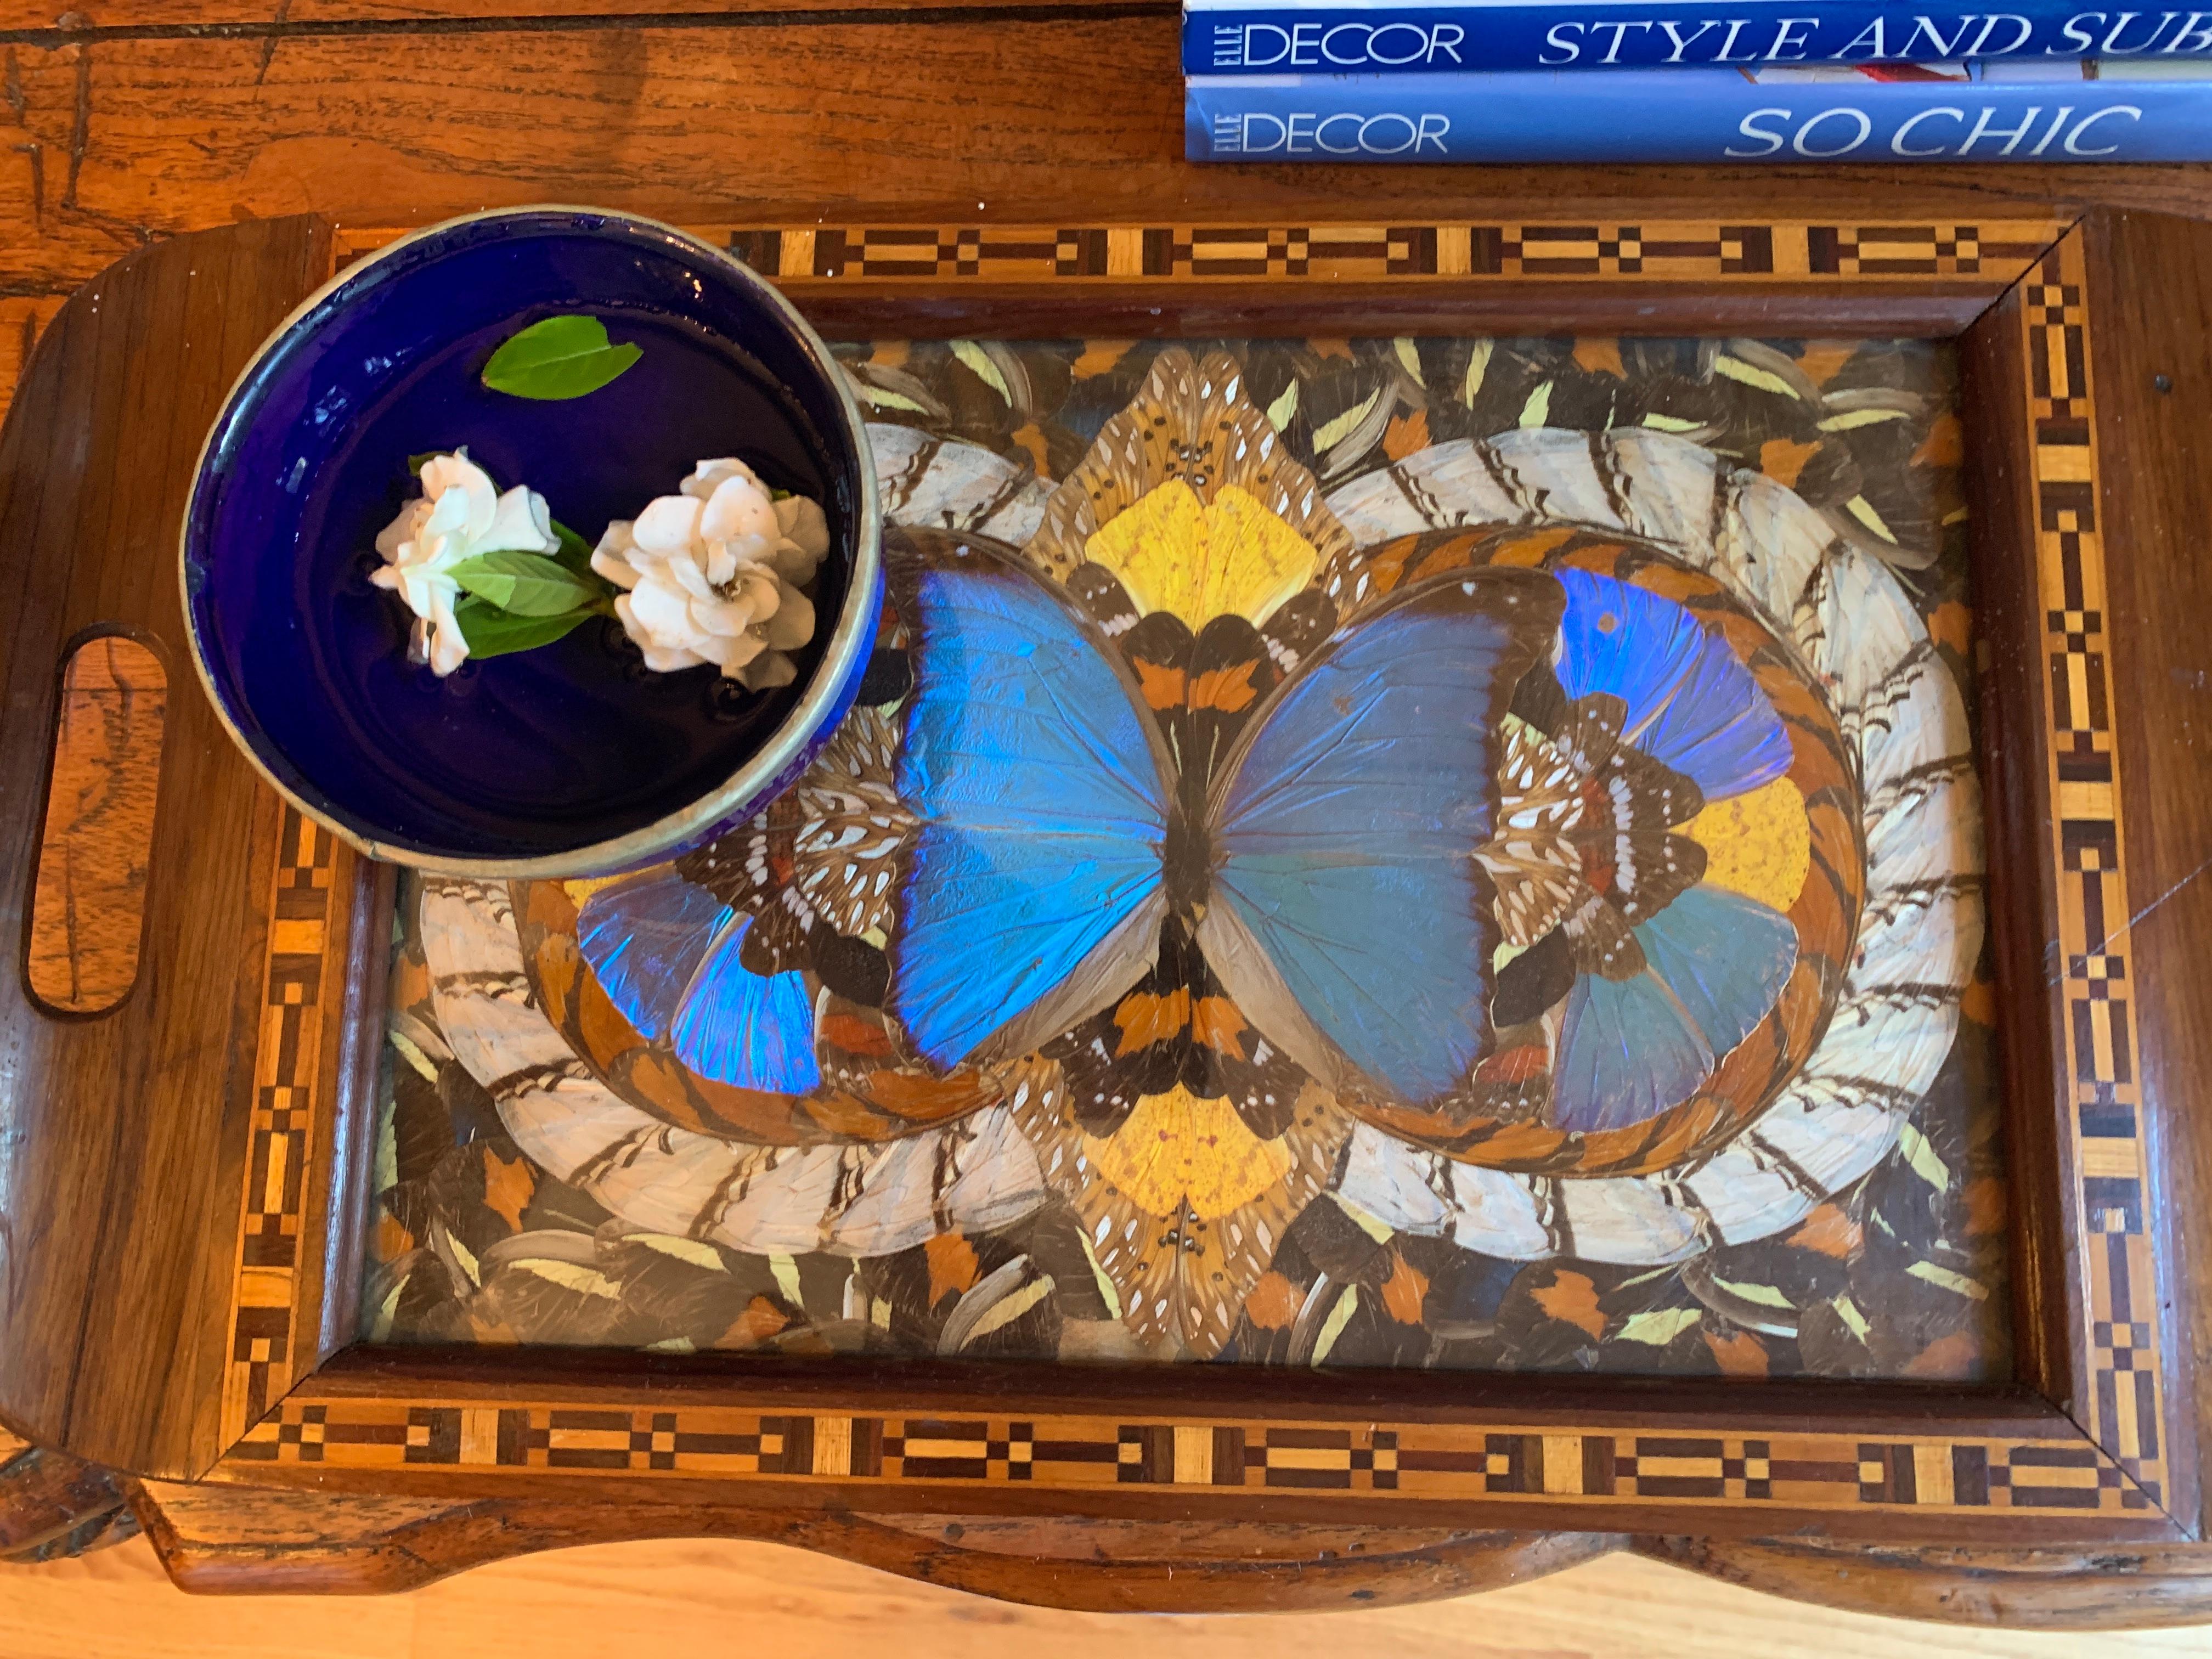 A rare and unique wooden tray with cut out handles and a wonderfully intricate inlay wood / marquetry perimeter with meticulous detailed collage of positioned Butterfly wing details making for a stunning Pattern and base - covered with glass for